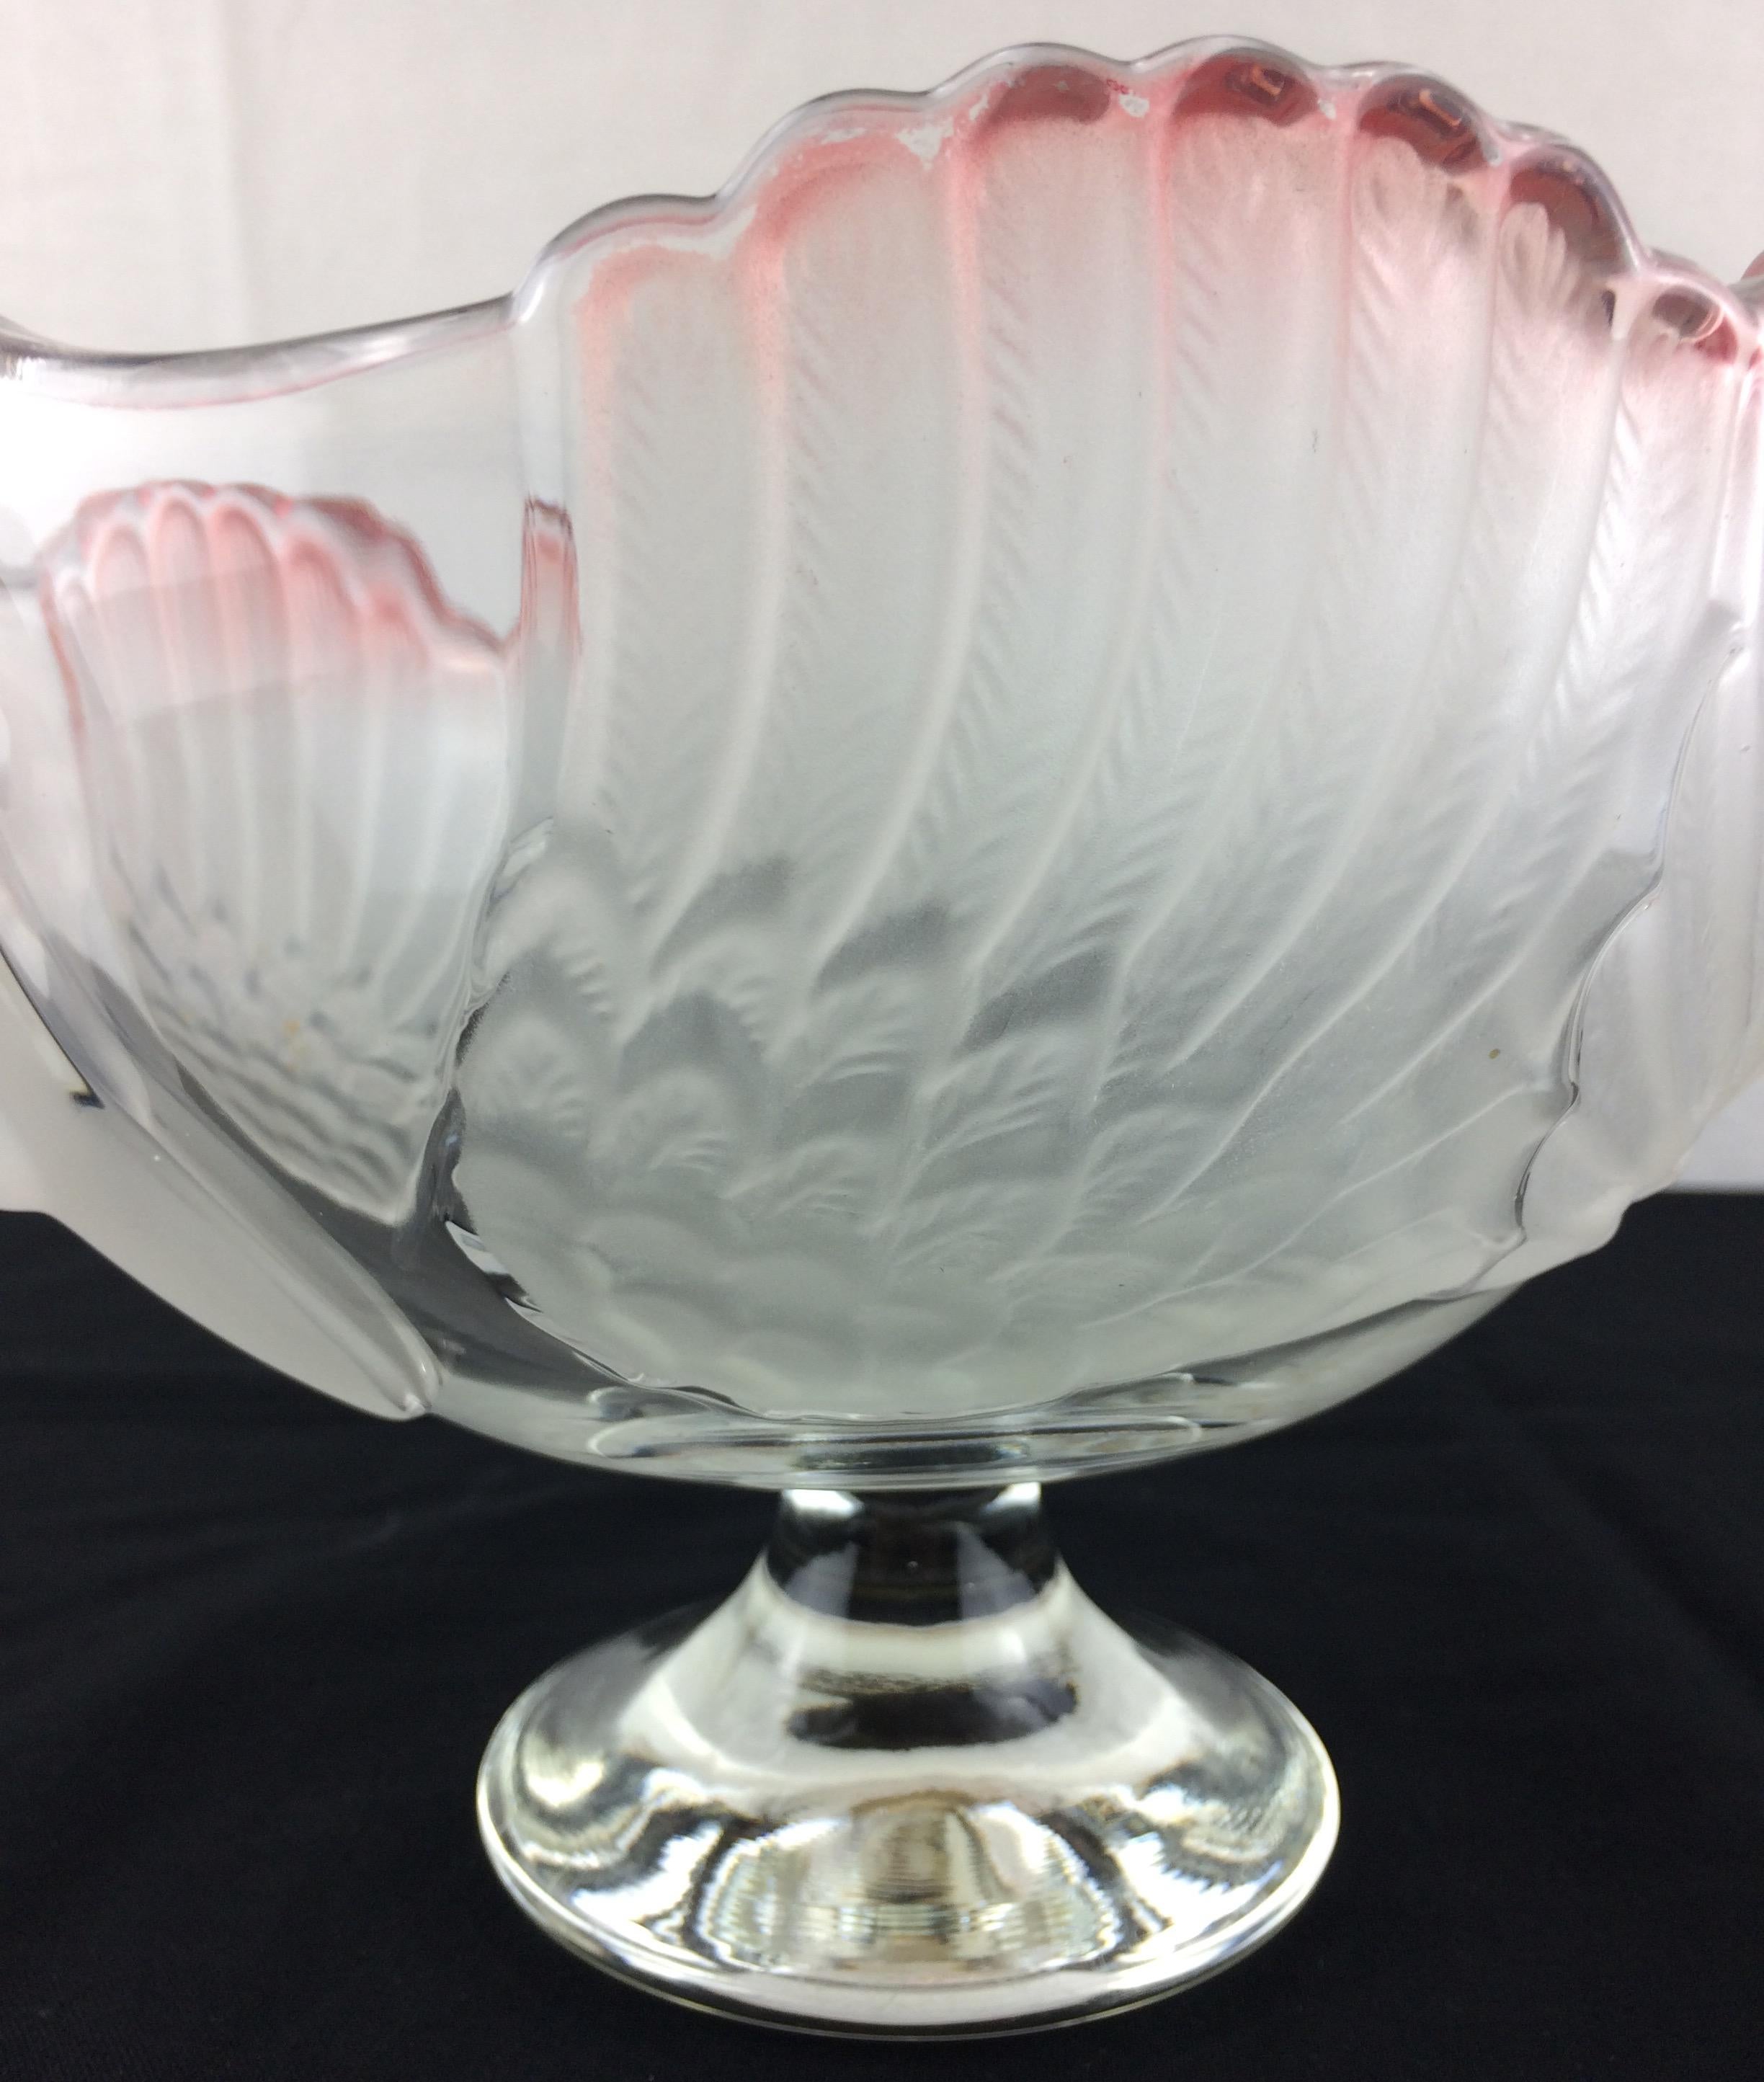 Beautiful midcentury period hand-cut crystal fruit bowl or serving dish. 

Very good quality.
This item is unmarked but is in the manner of many made by Daum.